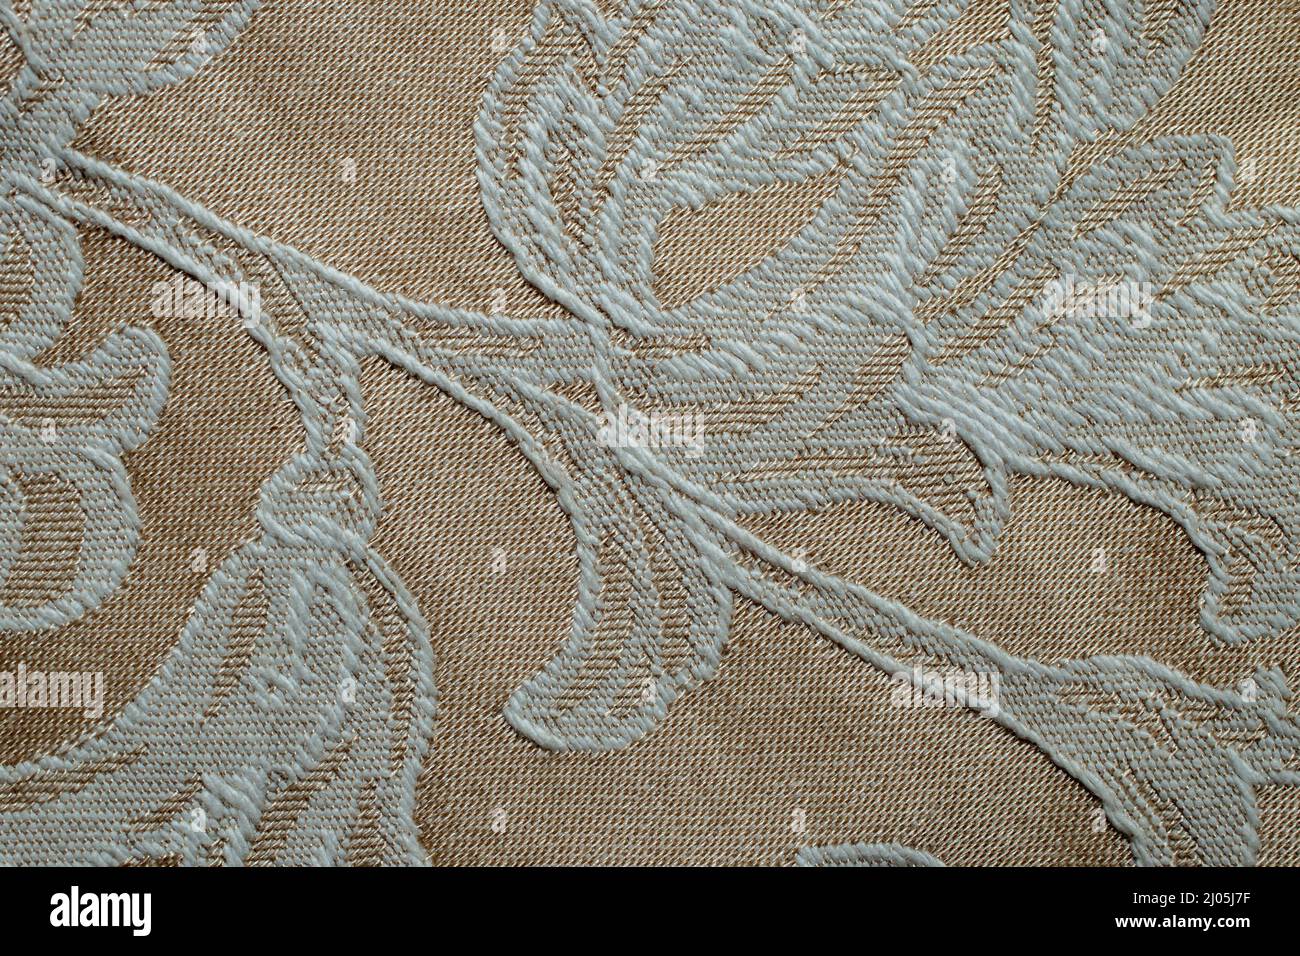 embroidery on a beige synthetic fabric, machine made Stock Photo